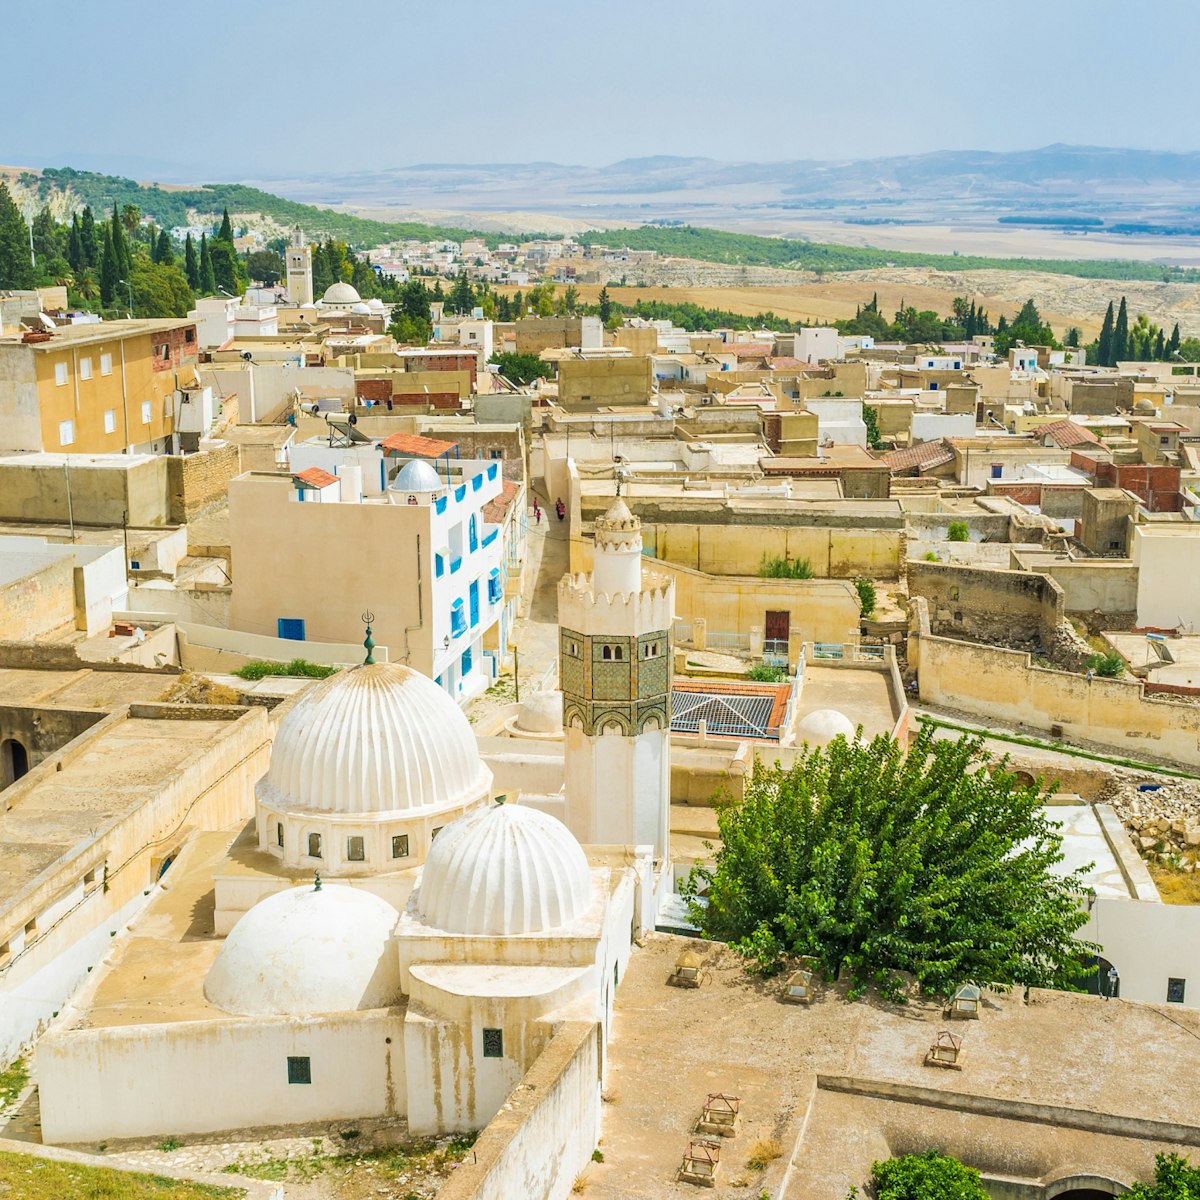 The aerial view on the roofs of the old town with the pearl of El Kef - Zaouia of Sidi Abdallah Boumakhlouf, Tunisia.; Shutterstock ID 356178005